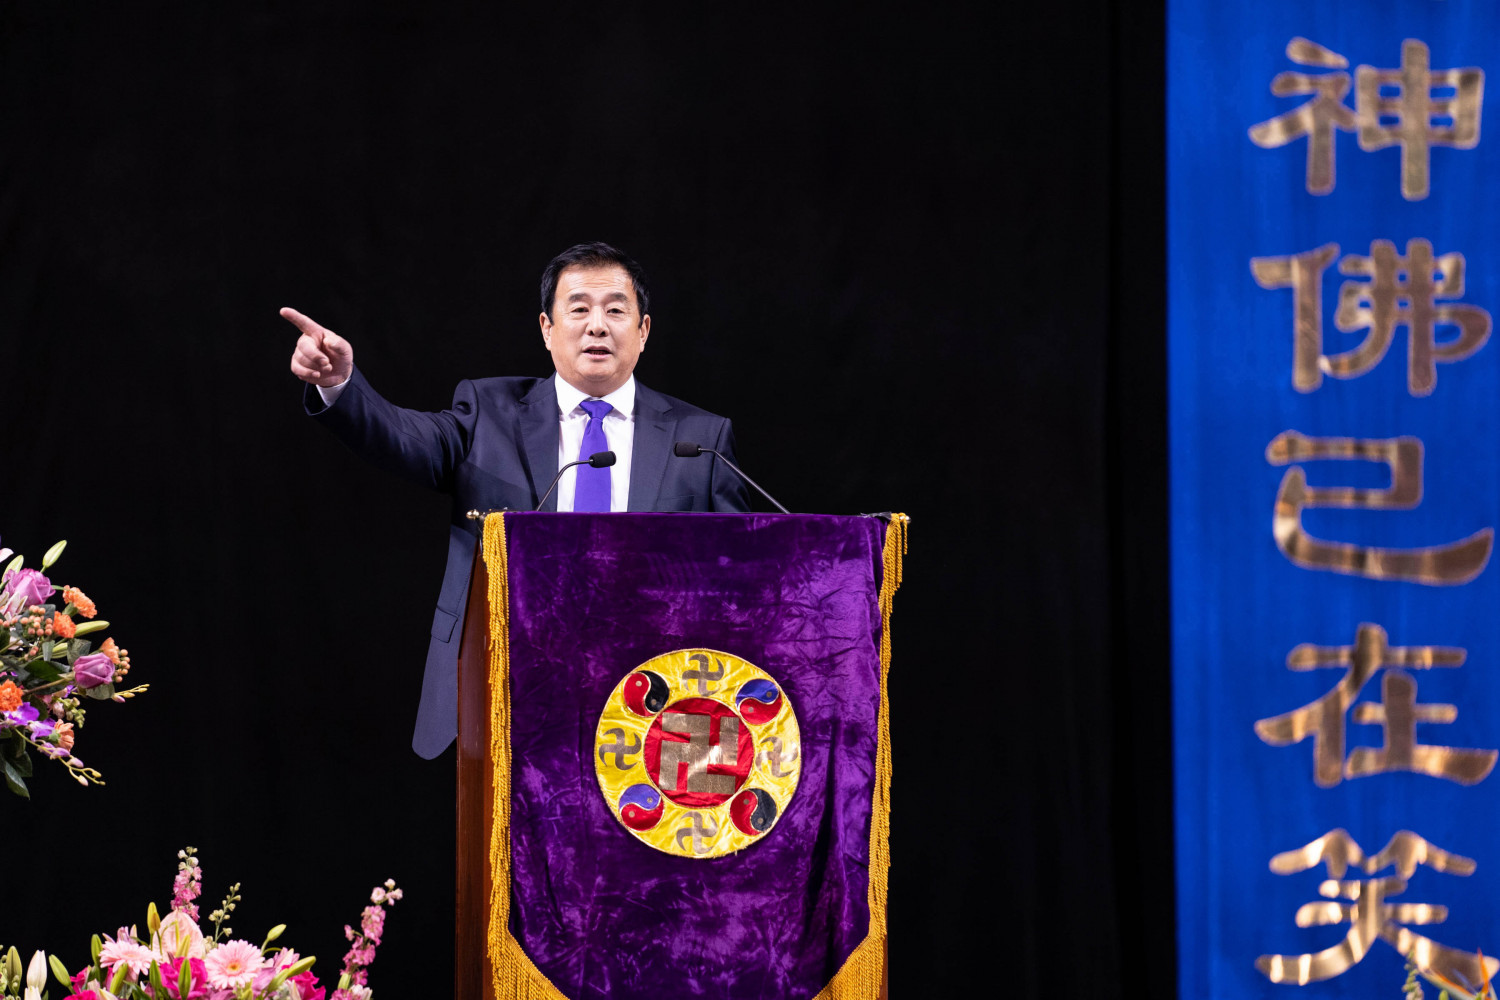 Over 10,000 Attend Falun Dafa Conference to Hear Stories of Self-Improvement